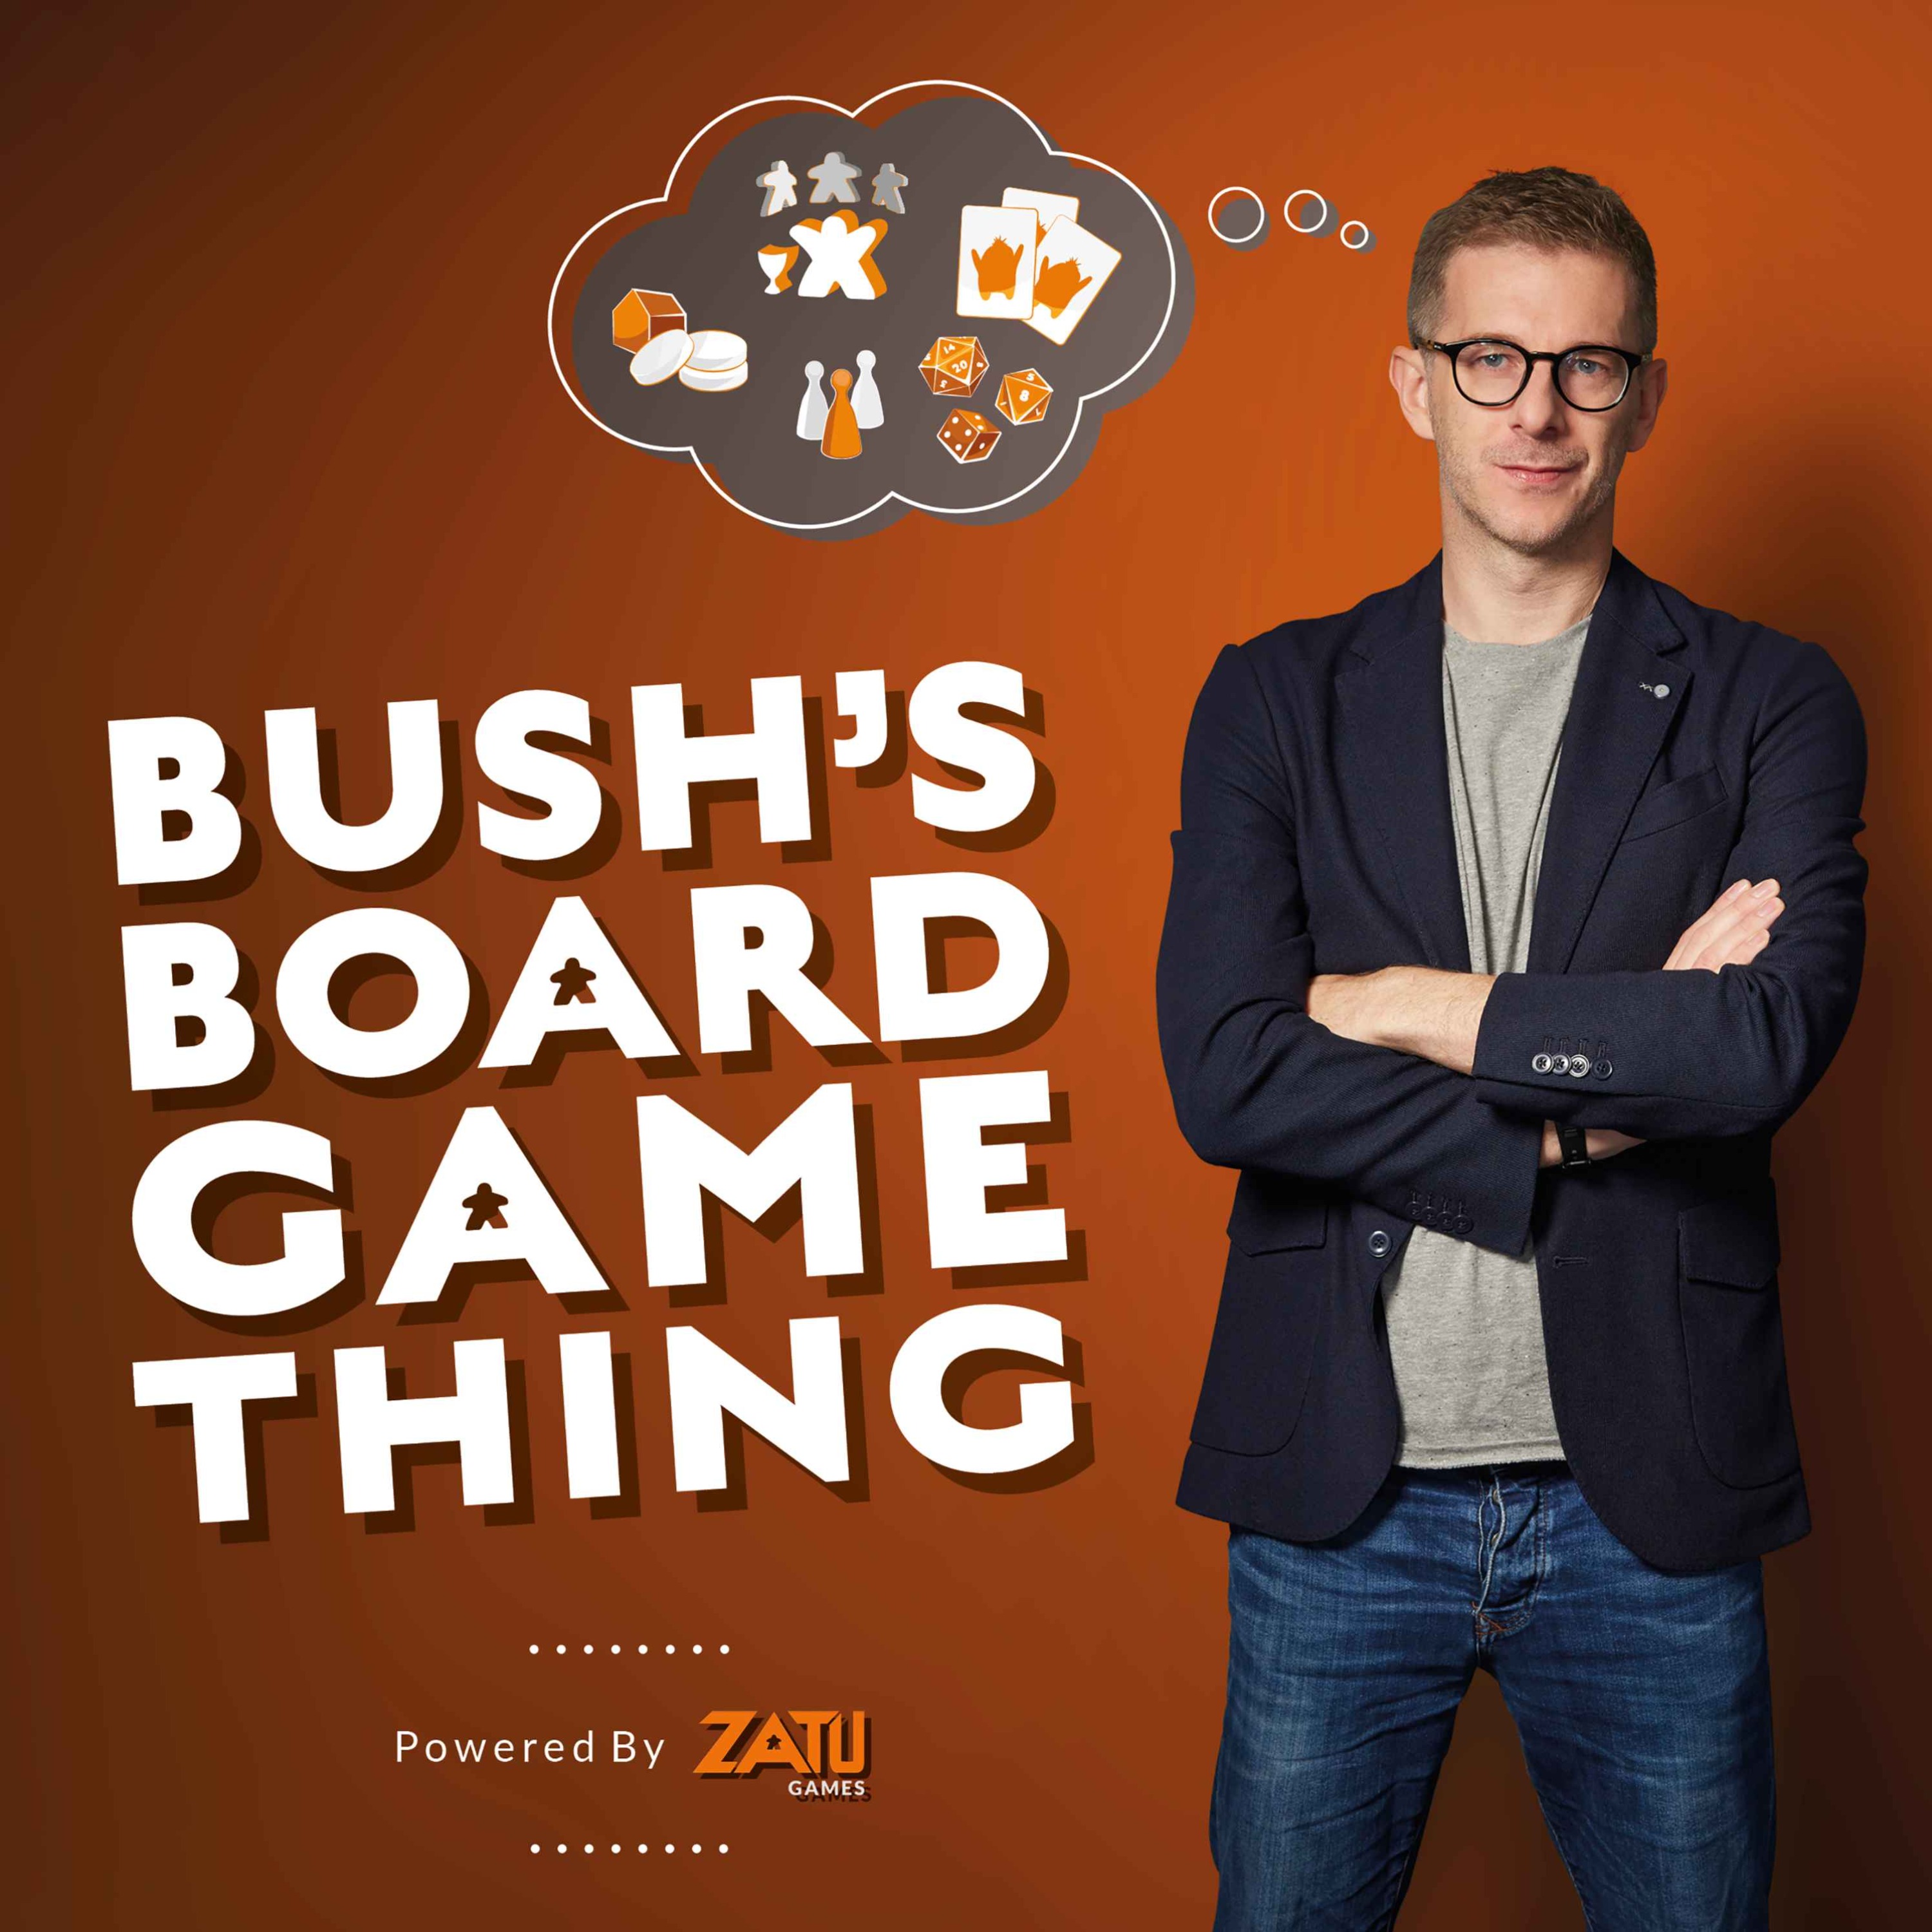 Introducing Bush’s Board Game Thing